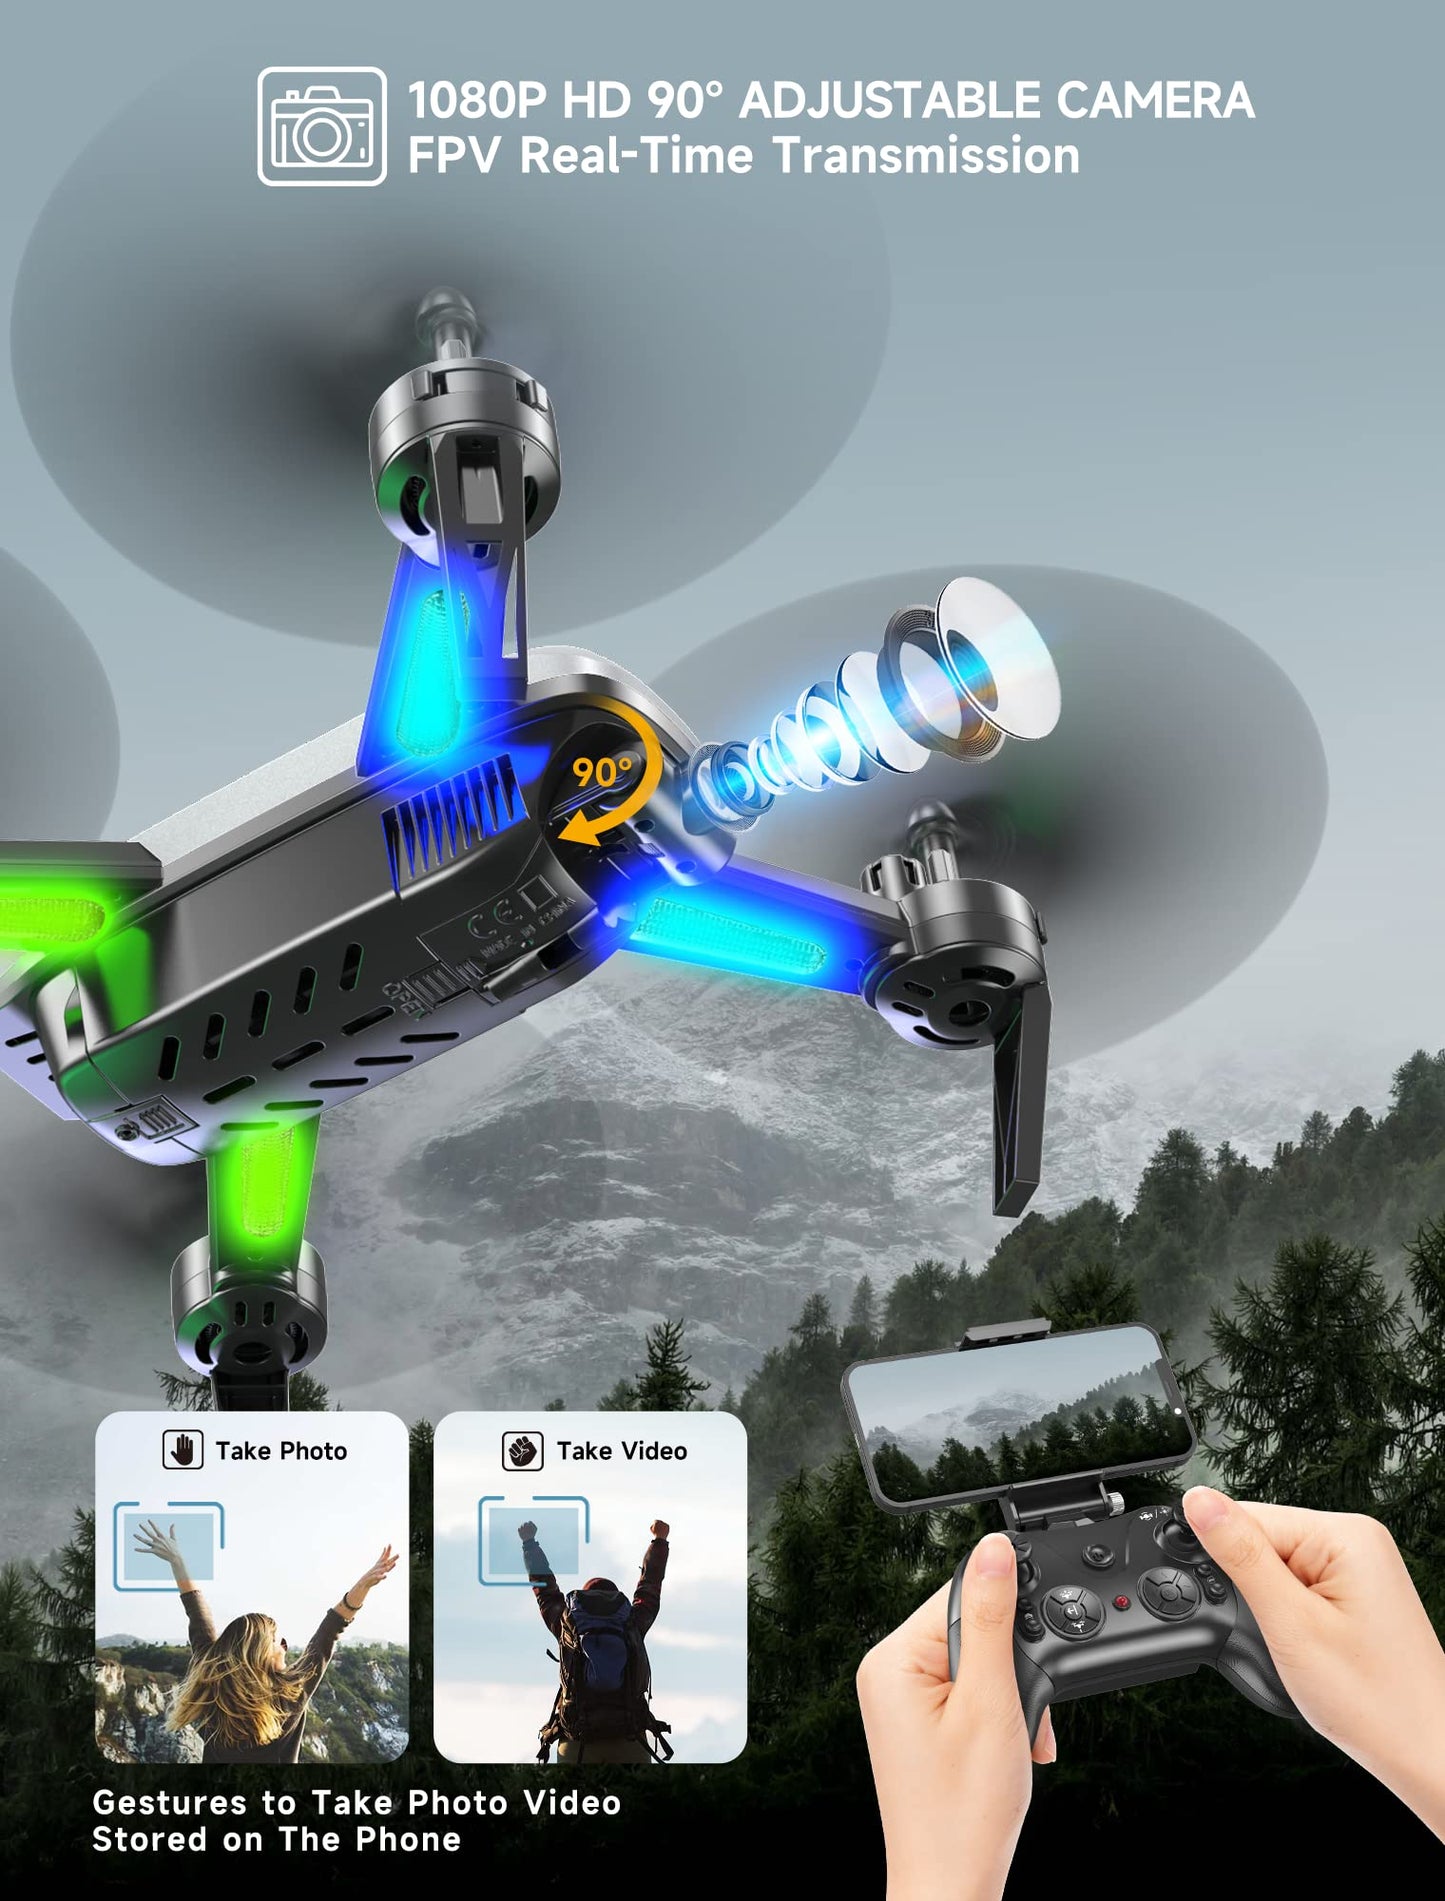 Wipkviey T6 Drone with Camera 1080P for Beginners, WiFi FPV RC Quadcopter for Adults, Gravity Sensor, Flip Mode, One Button Take off/Landing, One Button Return, Headless Mode, 2 Batteries